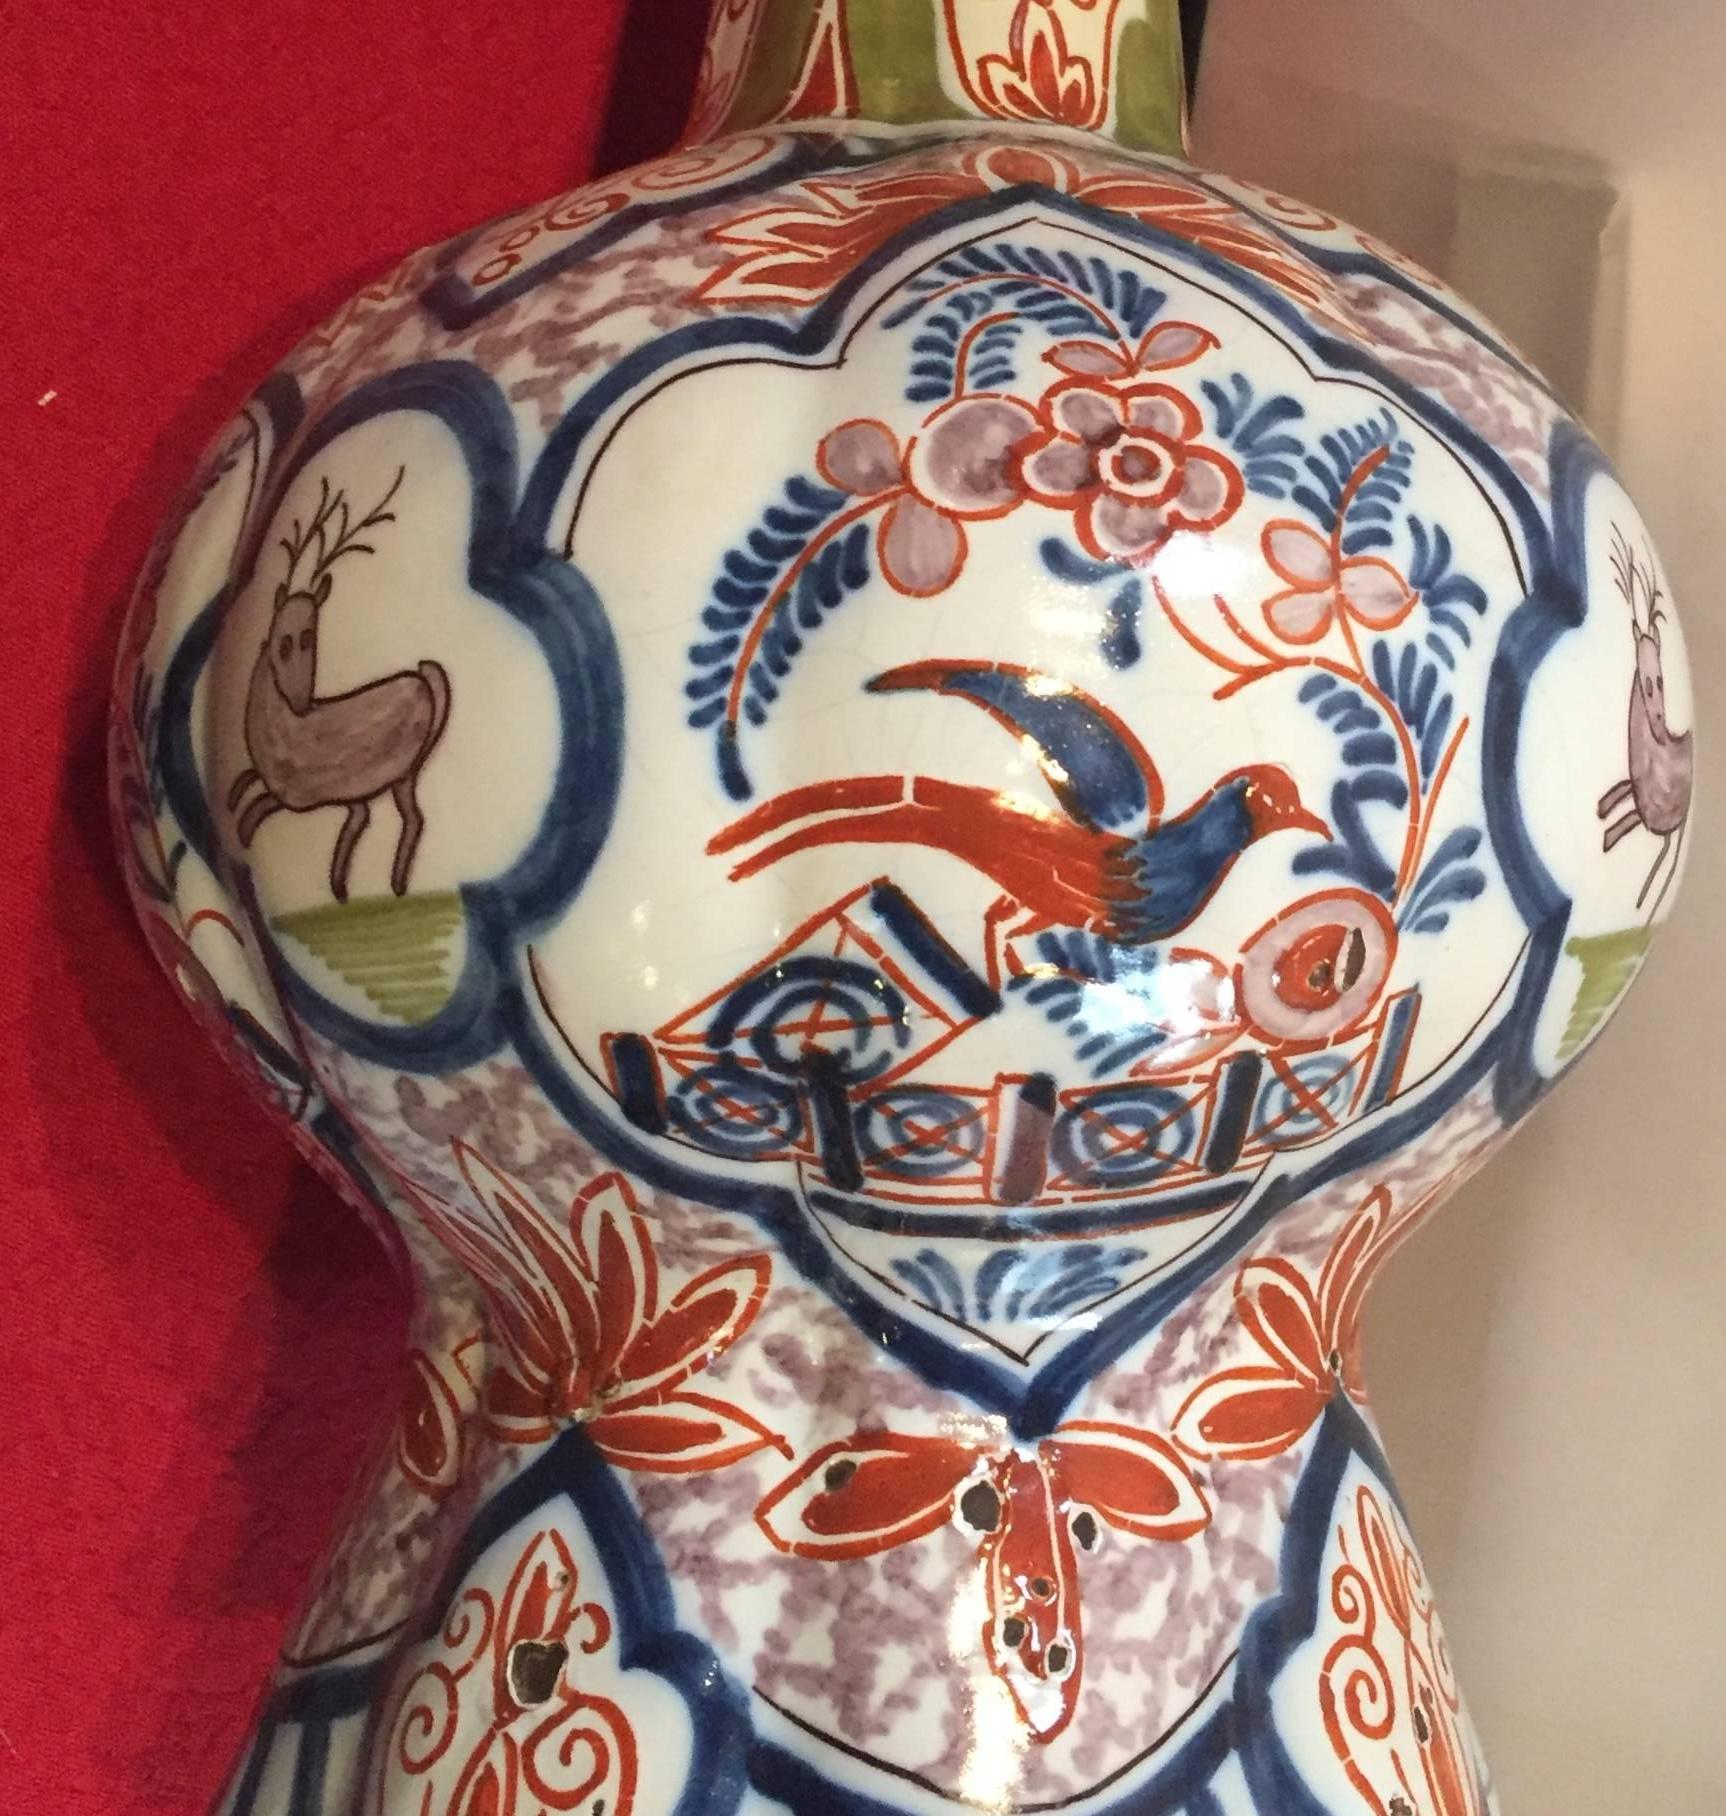 Delft polychrome vase from the 18th century.